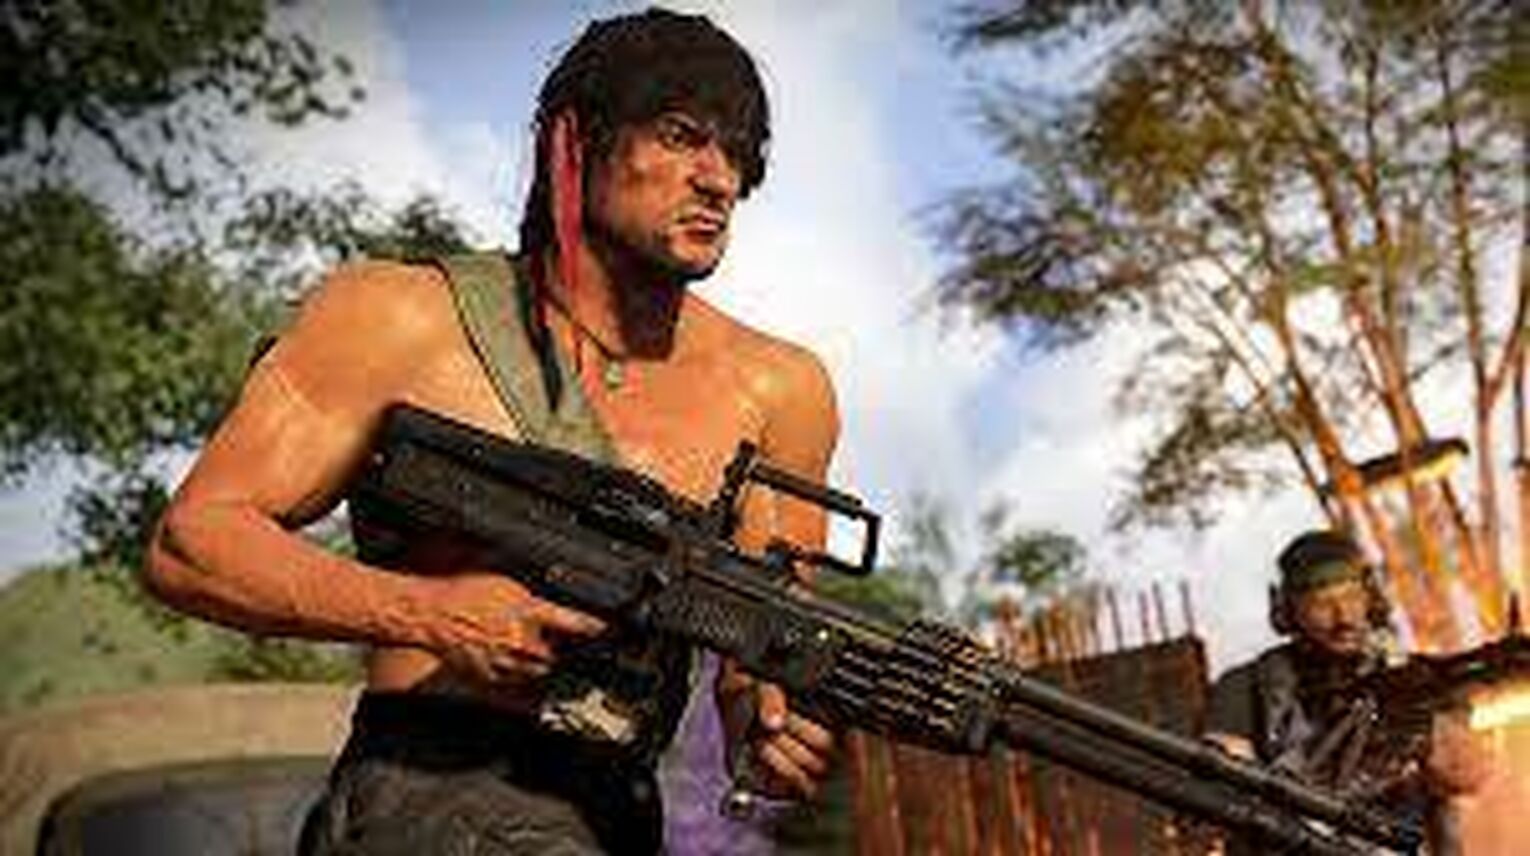 Sylvester Stallone COD appearance